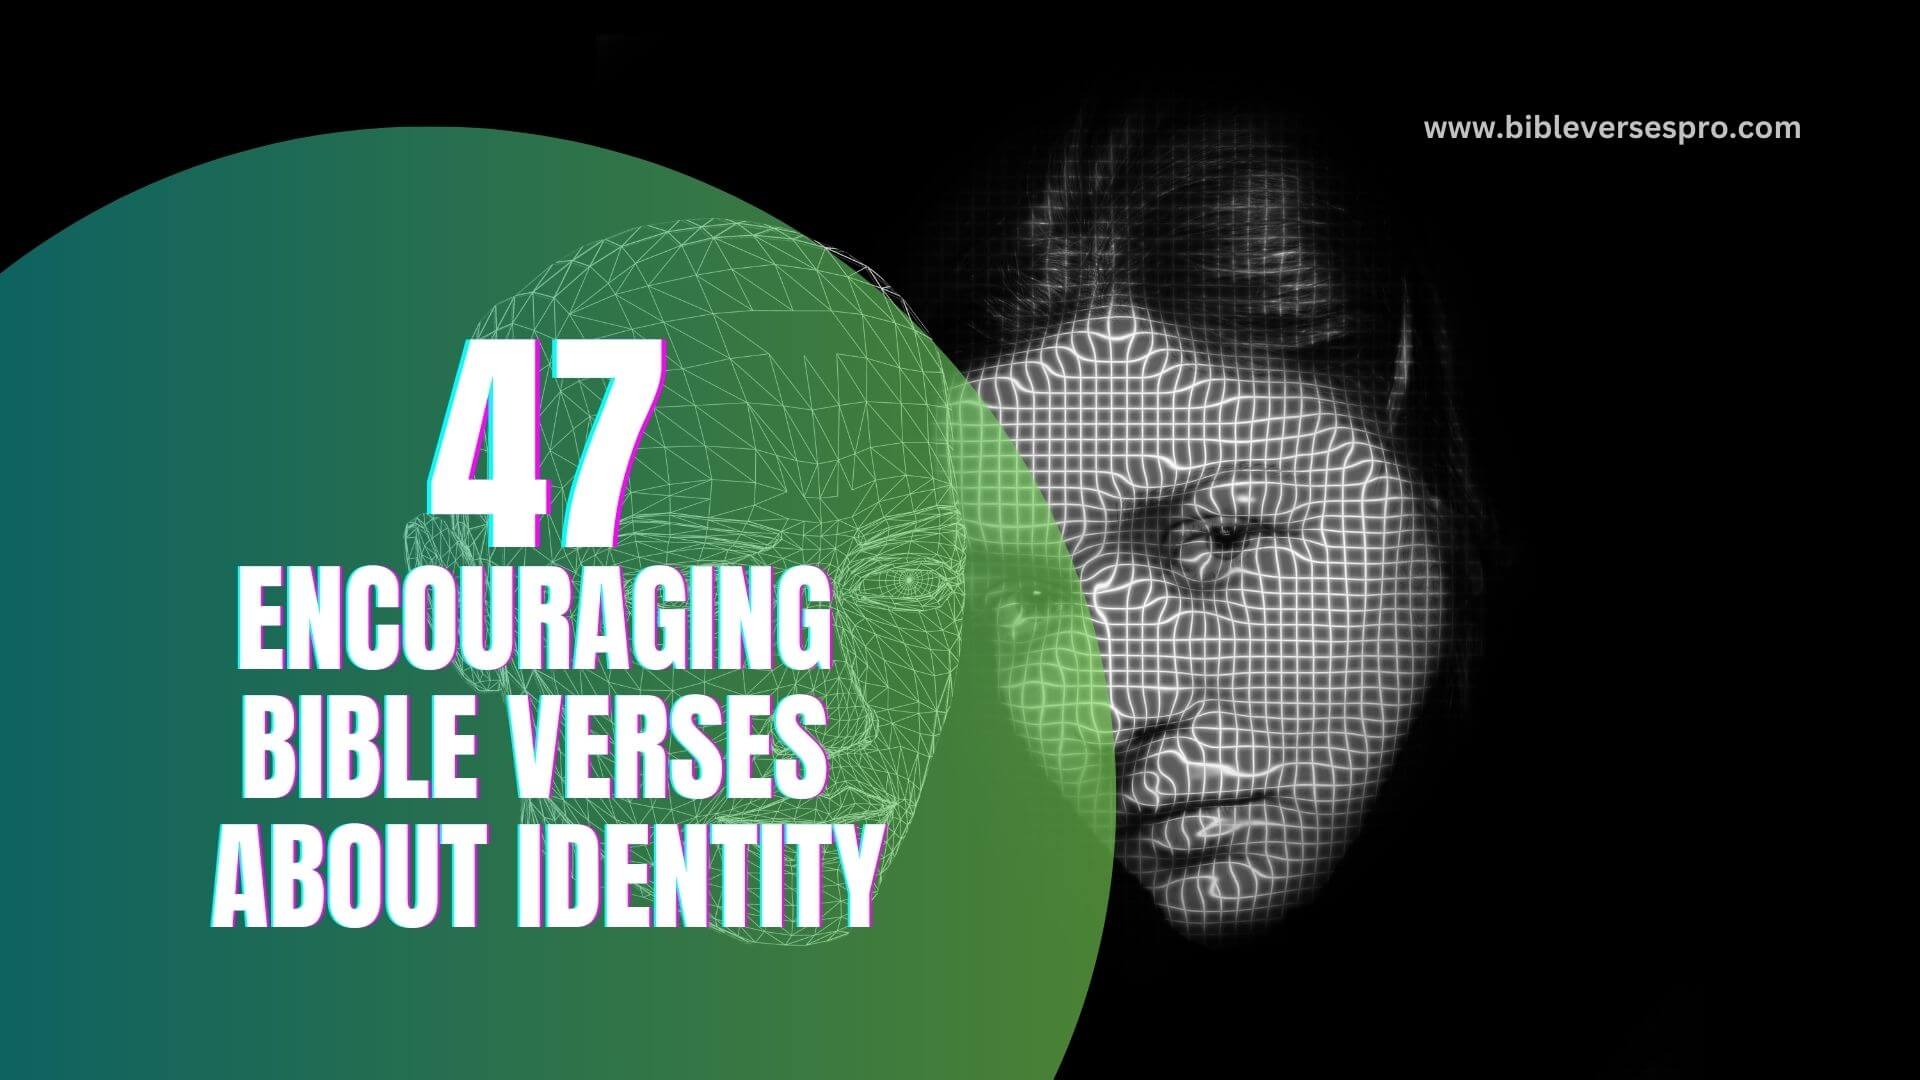 ENCOURAGING BIBLE VERSES ABOUT IDENTITY (1)